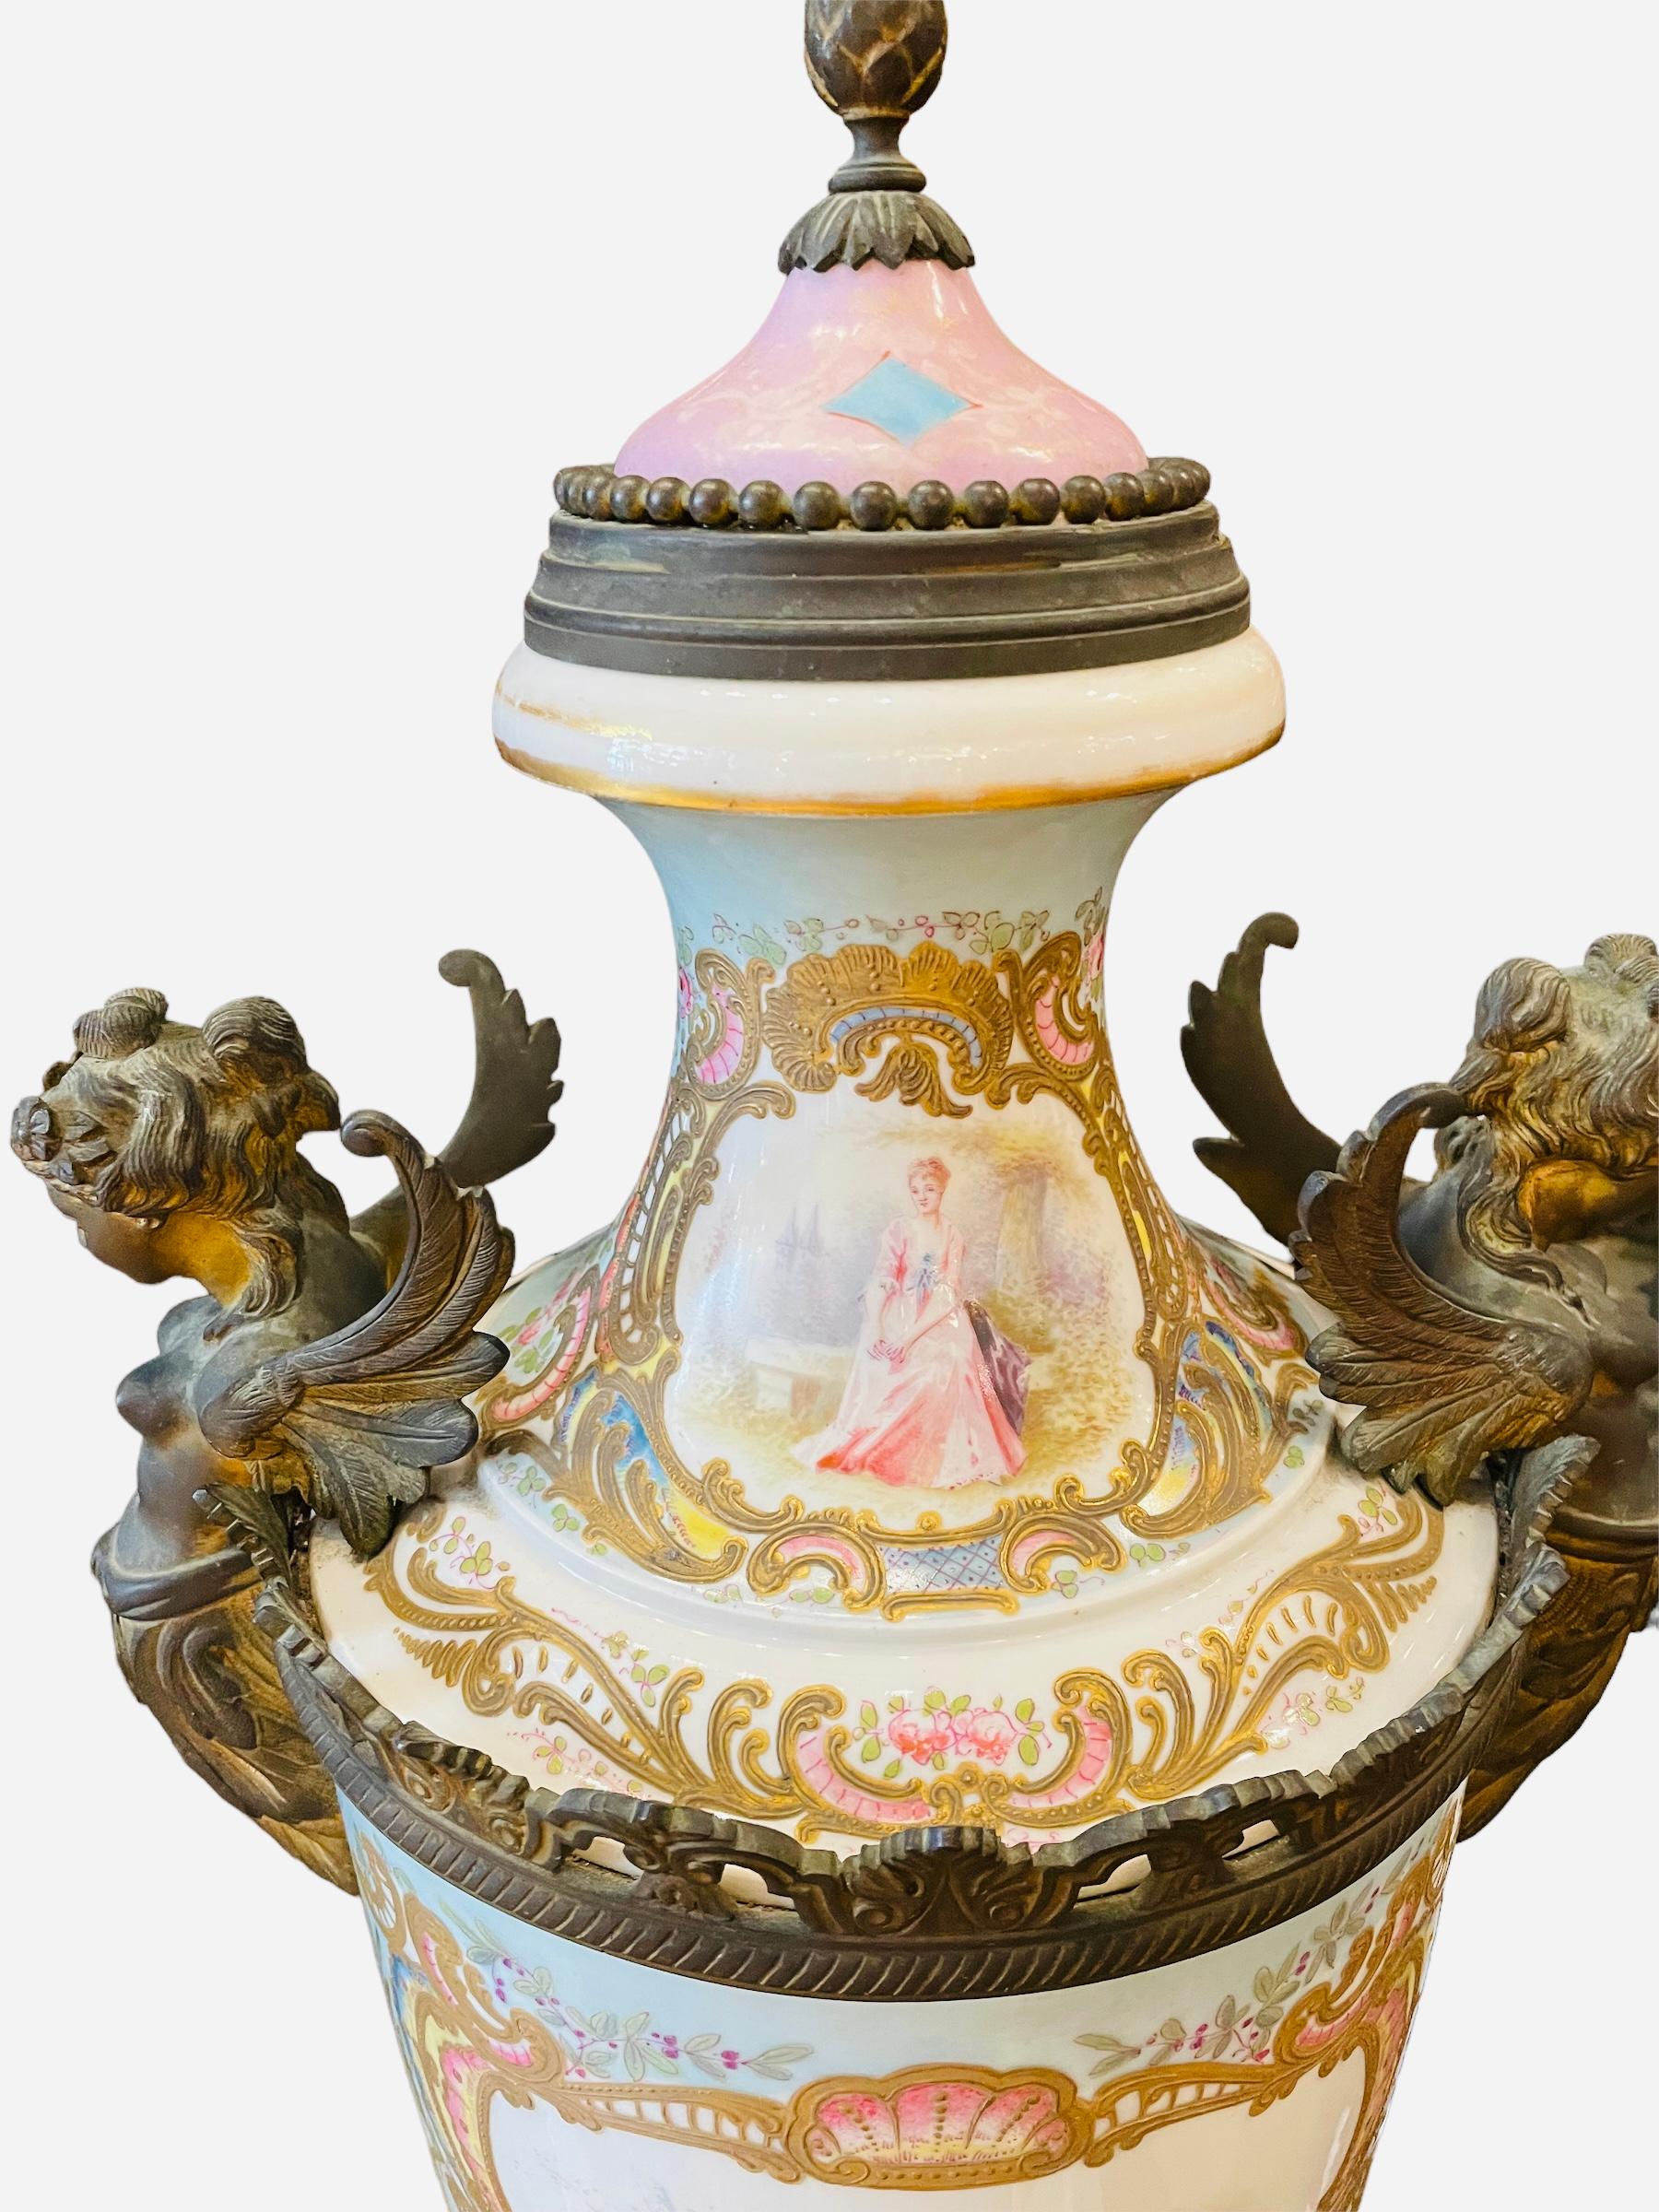 This is a large and heavy French Sevres style patinated bronze mounted porcelain lidded urn. It is hand painted in a white and sky blue background. It depicts a scene of an 18th century gentleman greeting a lady in the front center body of the urn.